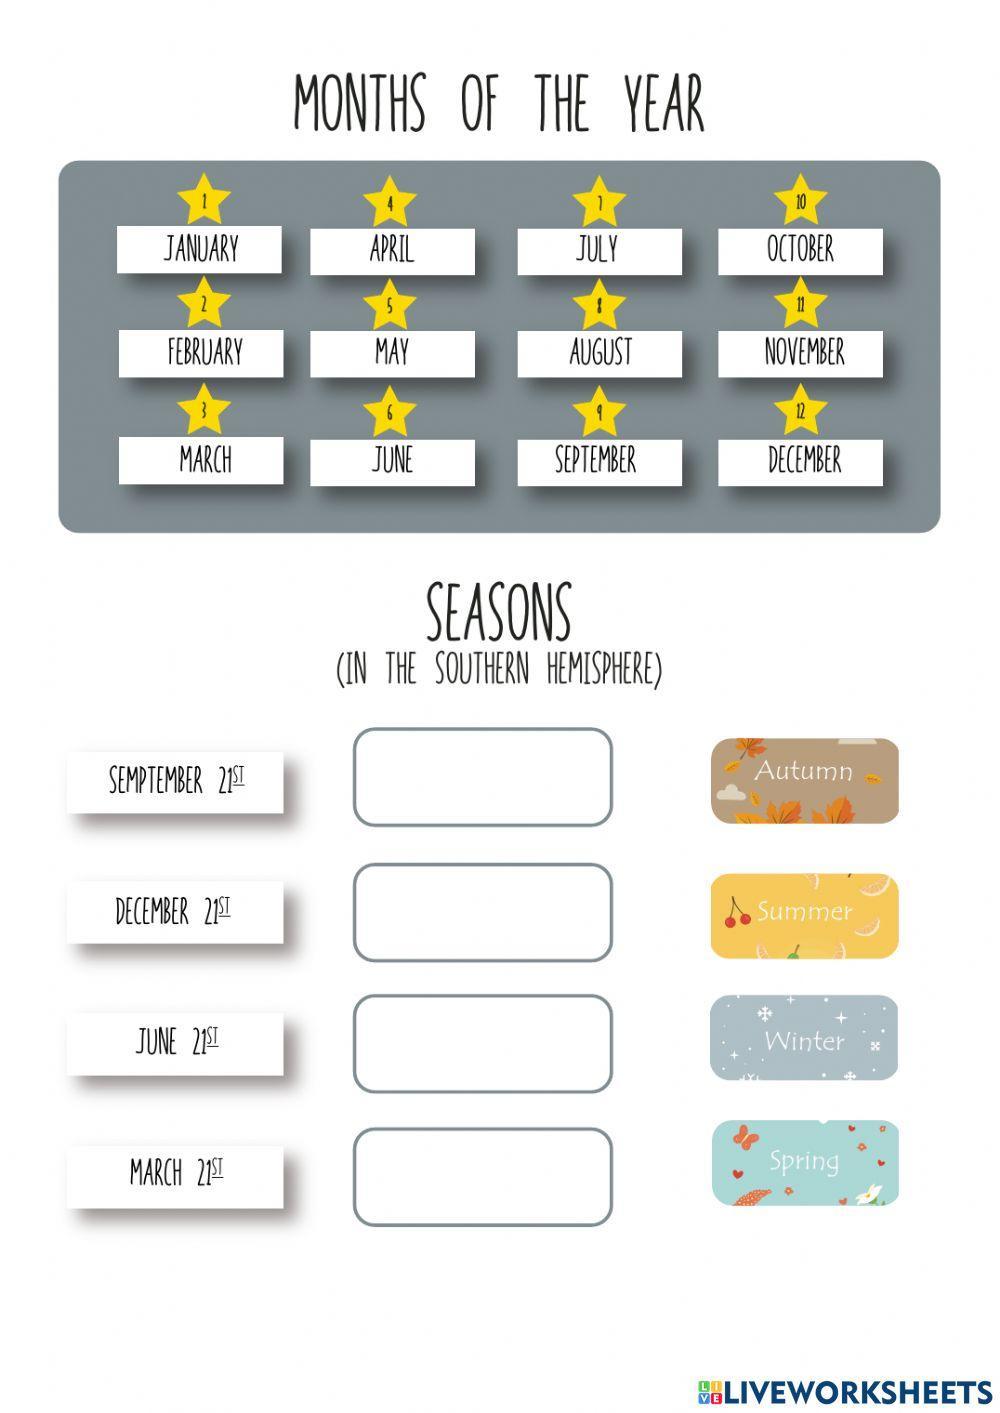 Months and seasons in the southern hemisphere